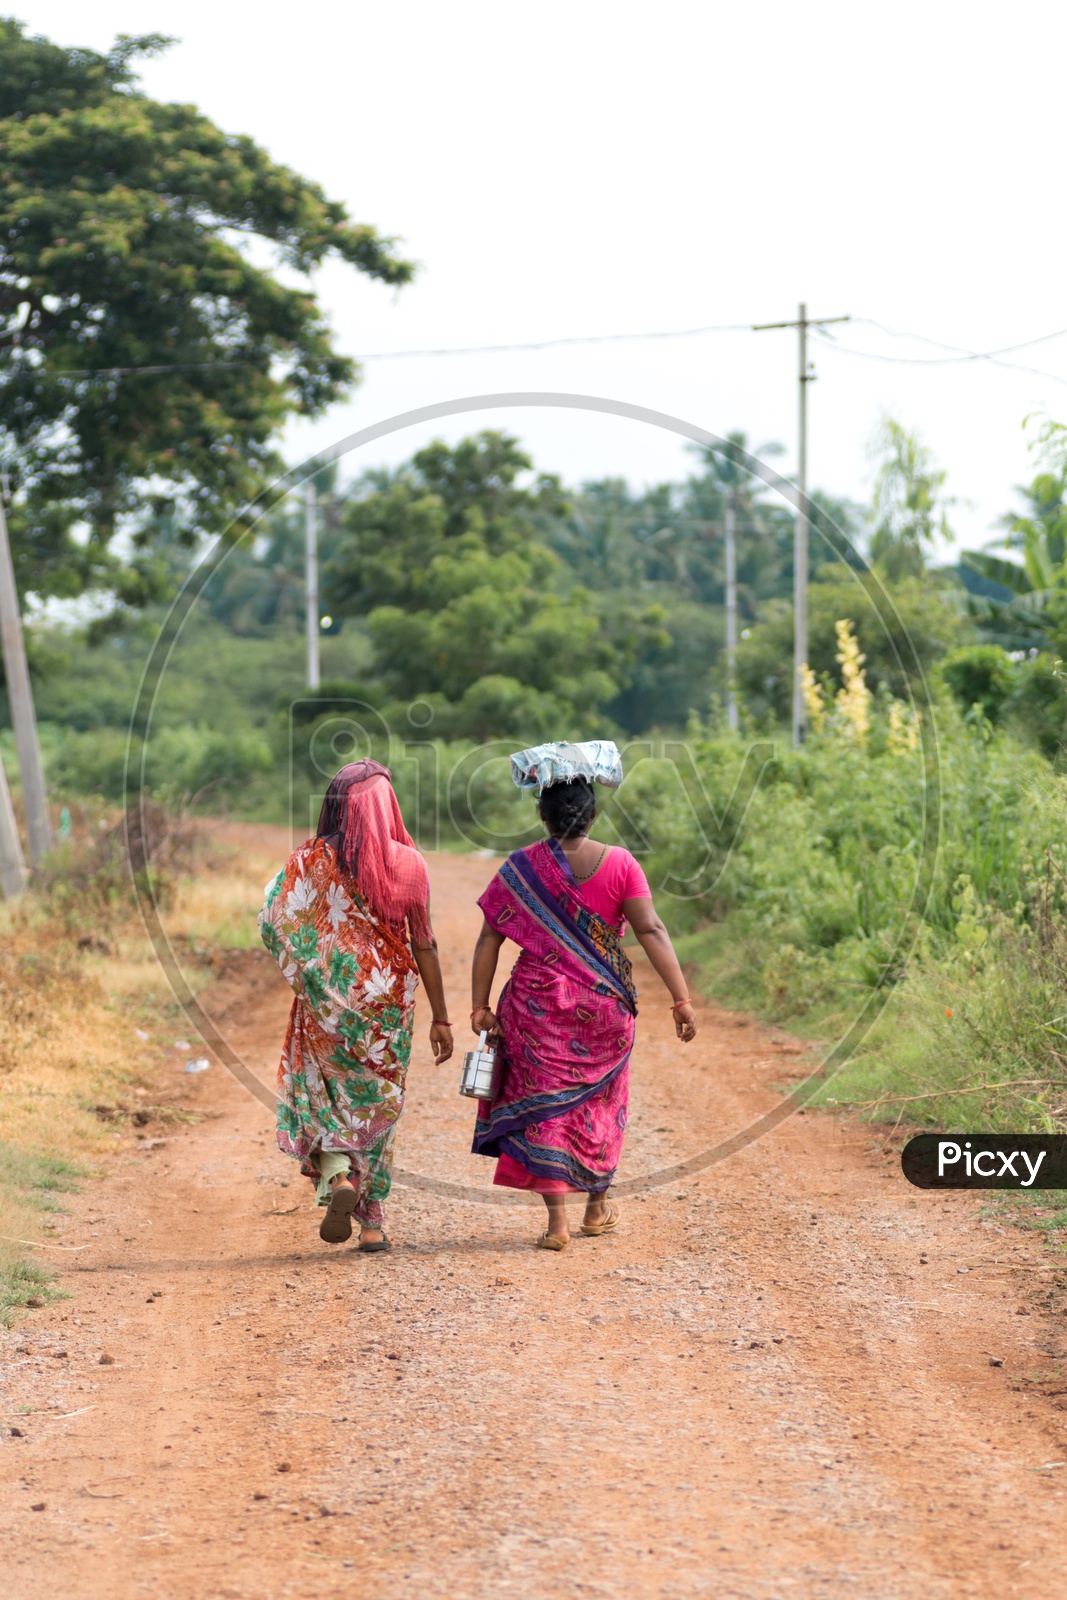 Woman Farmers Carrying Food in Lunch Boxes And Walking On Pathways To Fields